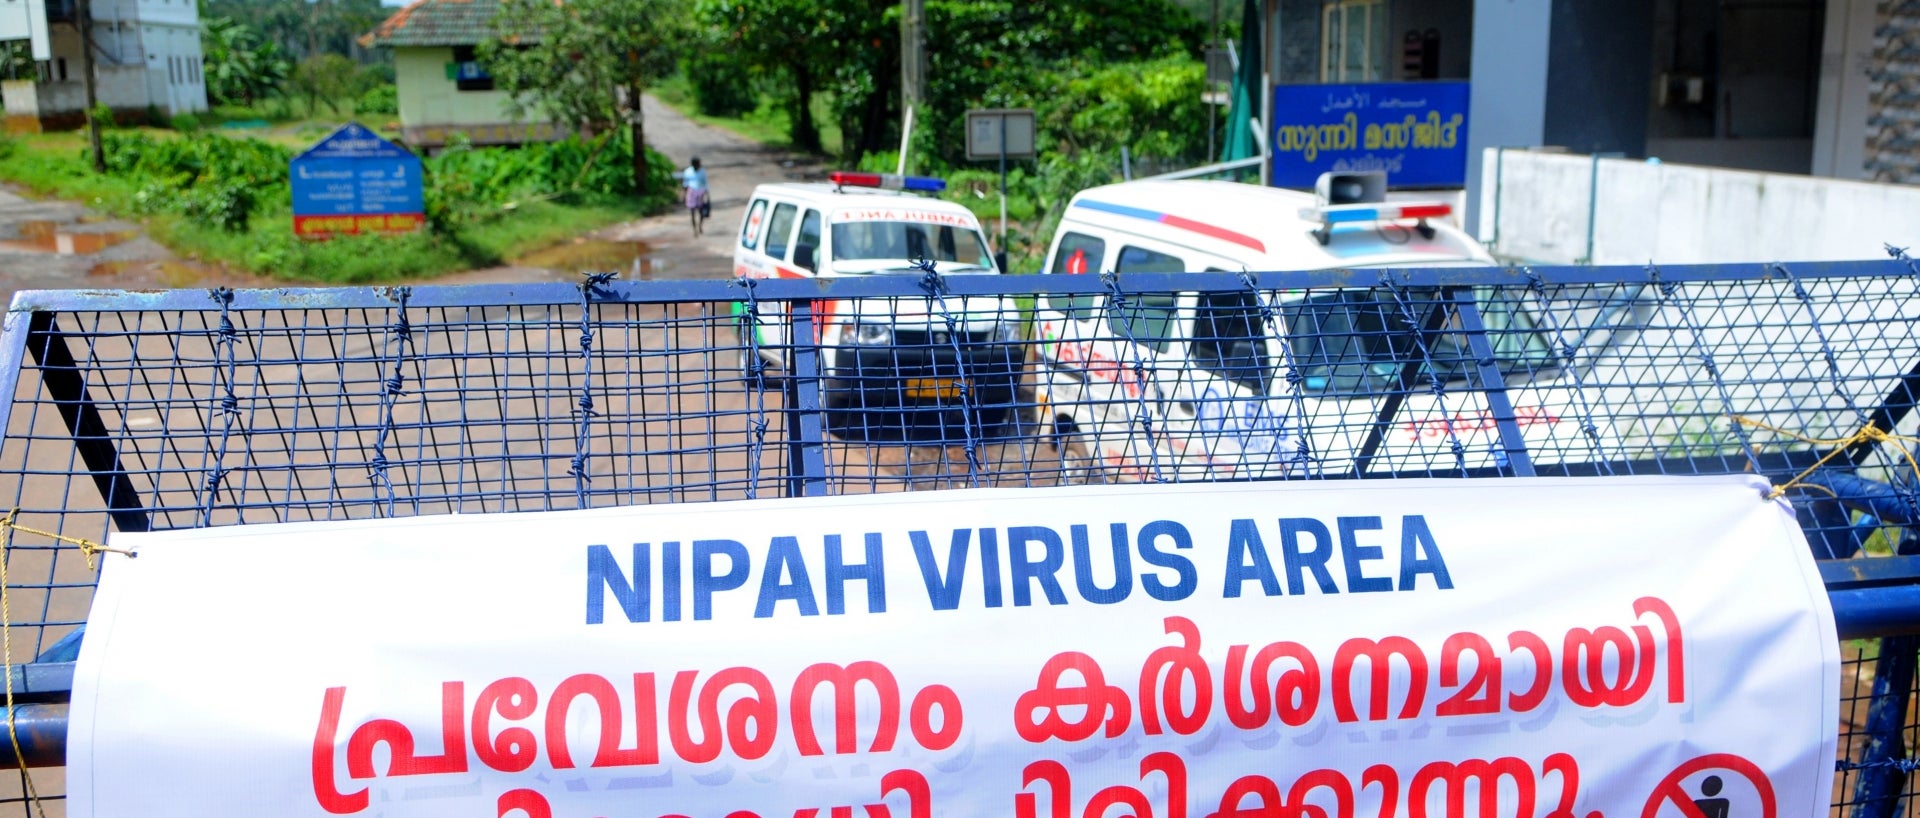 Health officials sealed off an area in Kerala in order to isolate people who have potentially been exposed to Nipah.